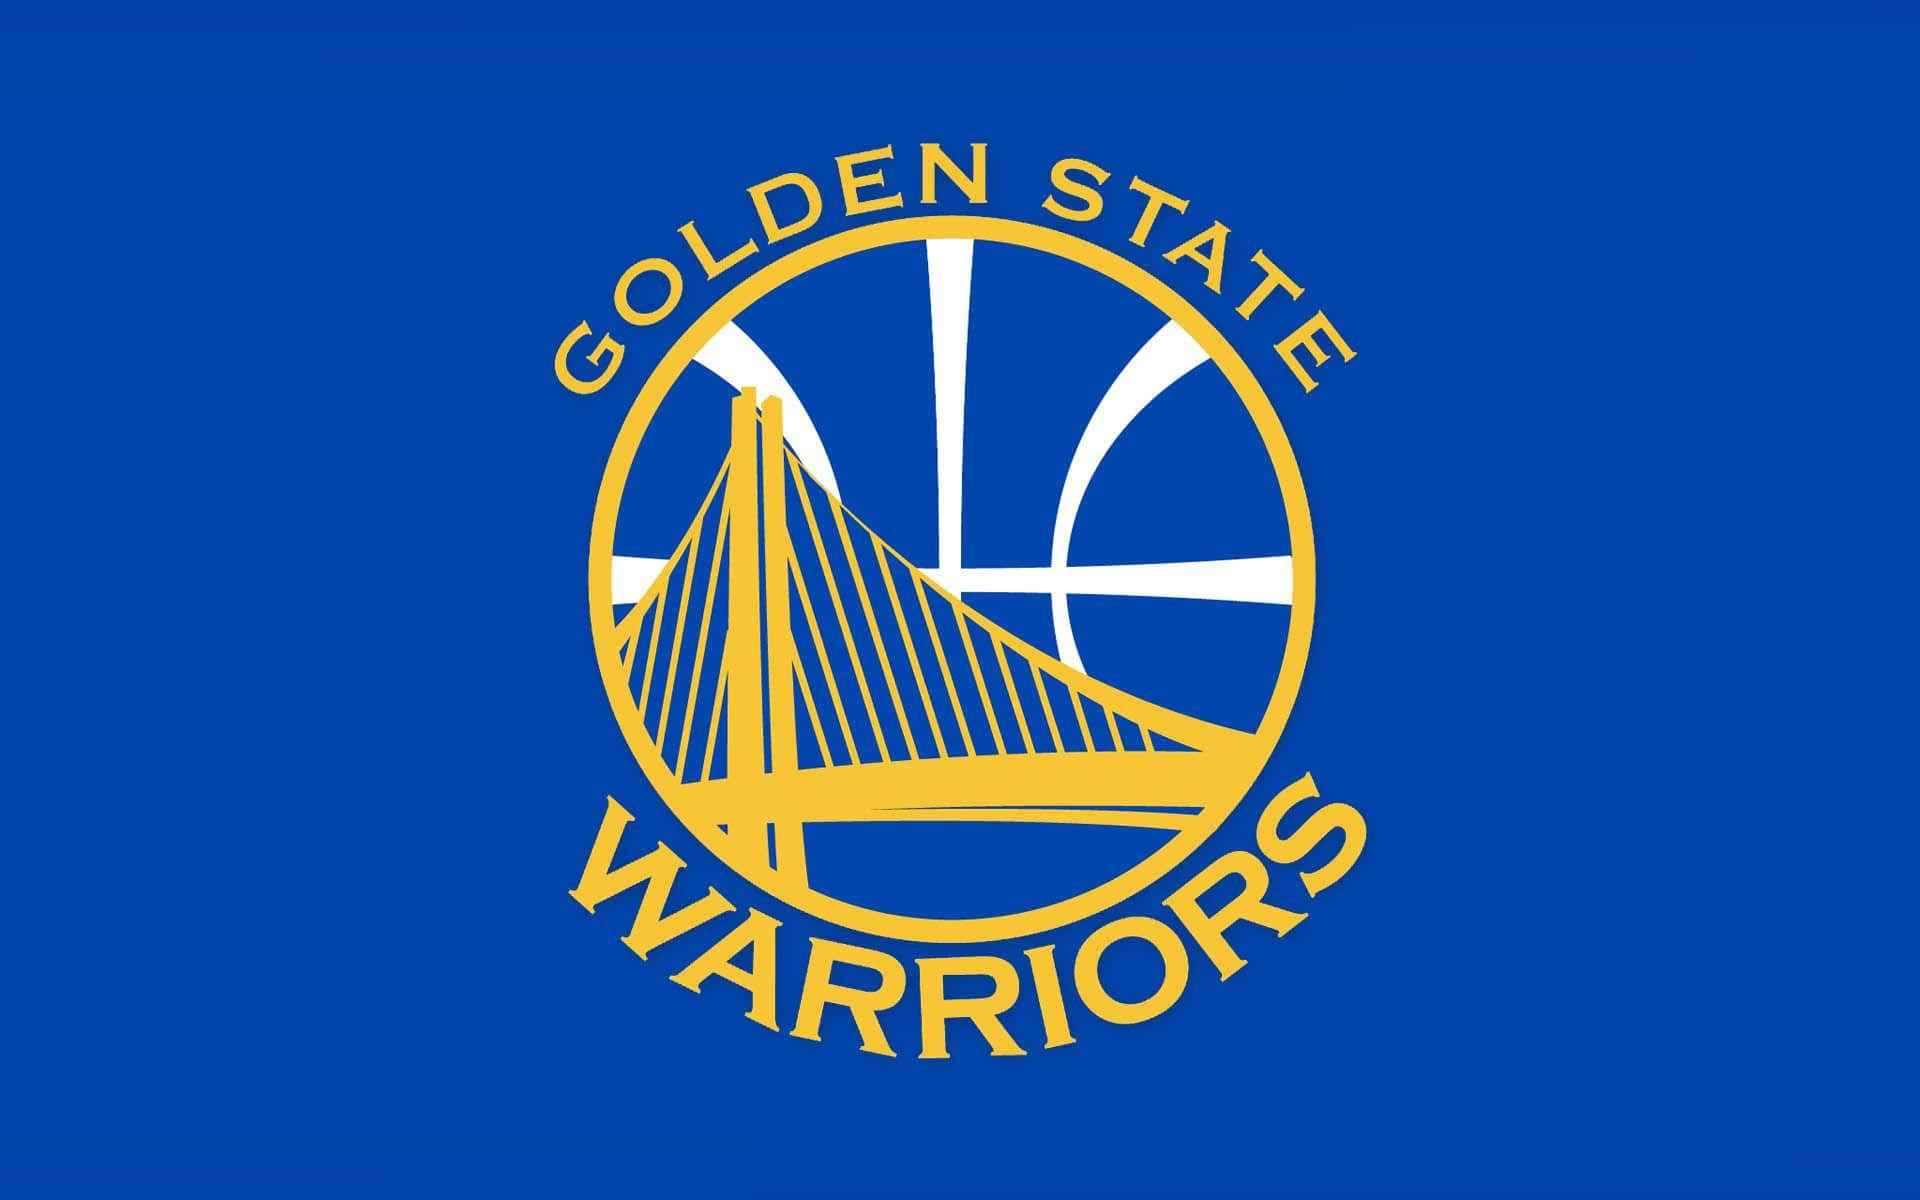 Golden State Warriors official logo featuring the iconic blue and yellow GSW Wallpaper